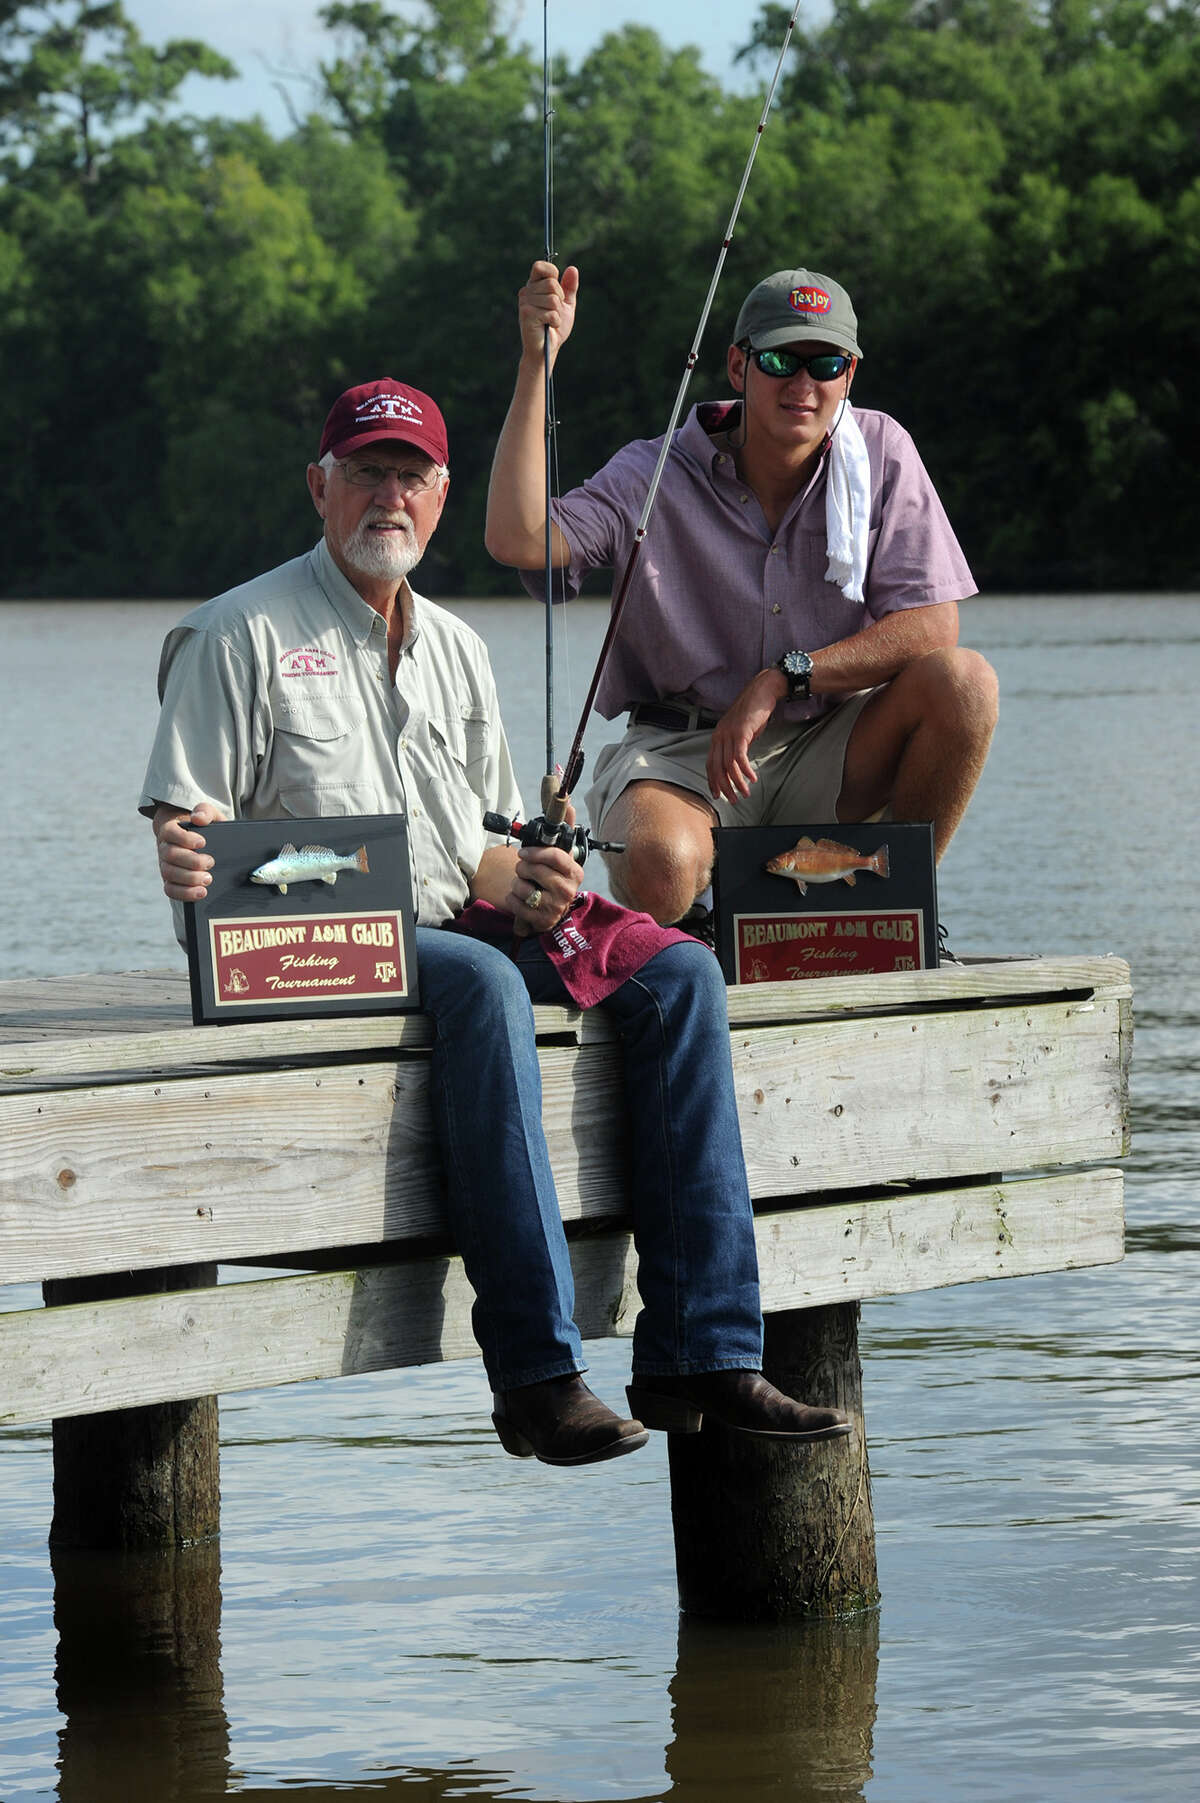 The Beaumont A&M Club will host its 17th annual fishing tournament at Pleasure Island on Saturday. Nick Prewitt and Tom Natho hold their fishing rods and plaques that will be handed out at Colliers Ferry Park on Friday. Photo taken Friday, August 08, 2014 Guiseppe Barranco/@spotnewsshooter